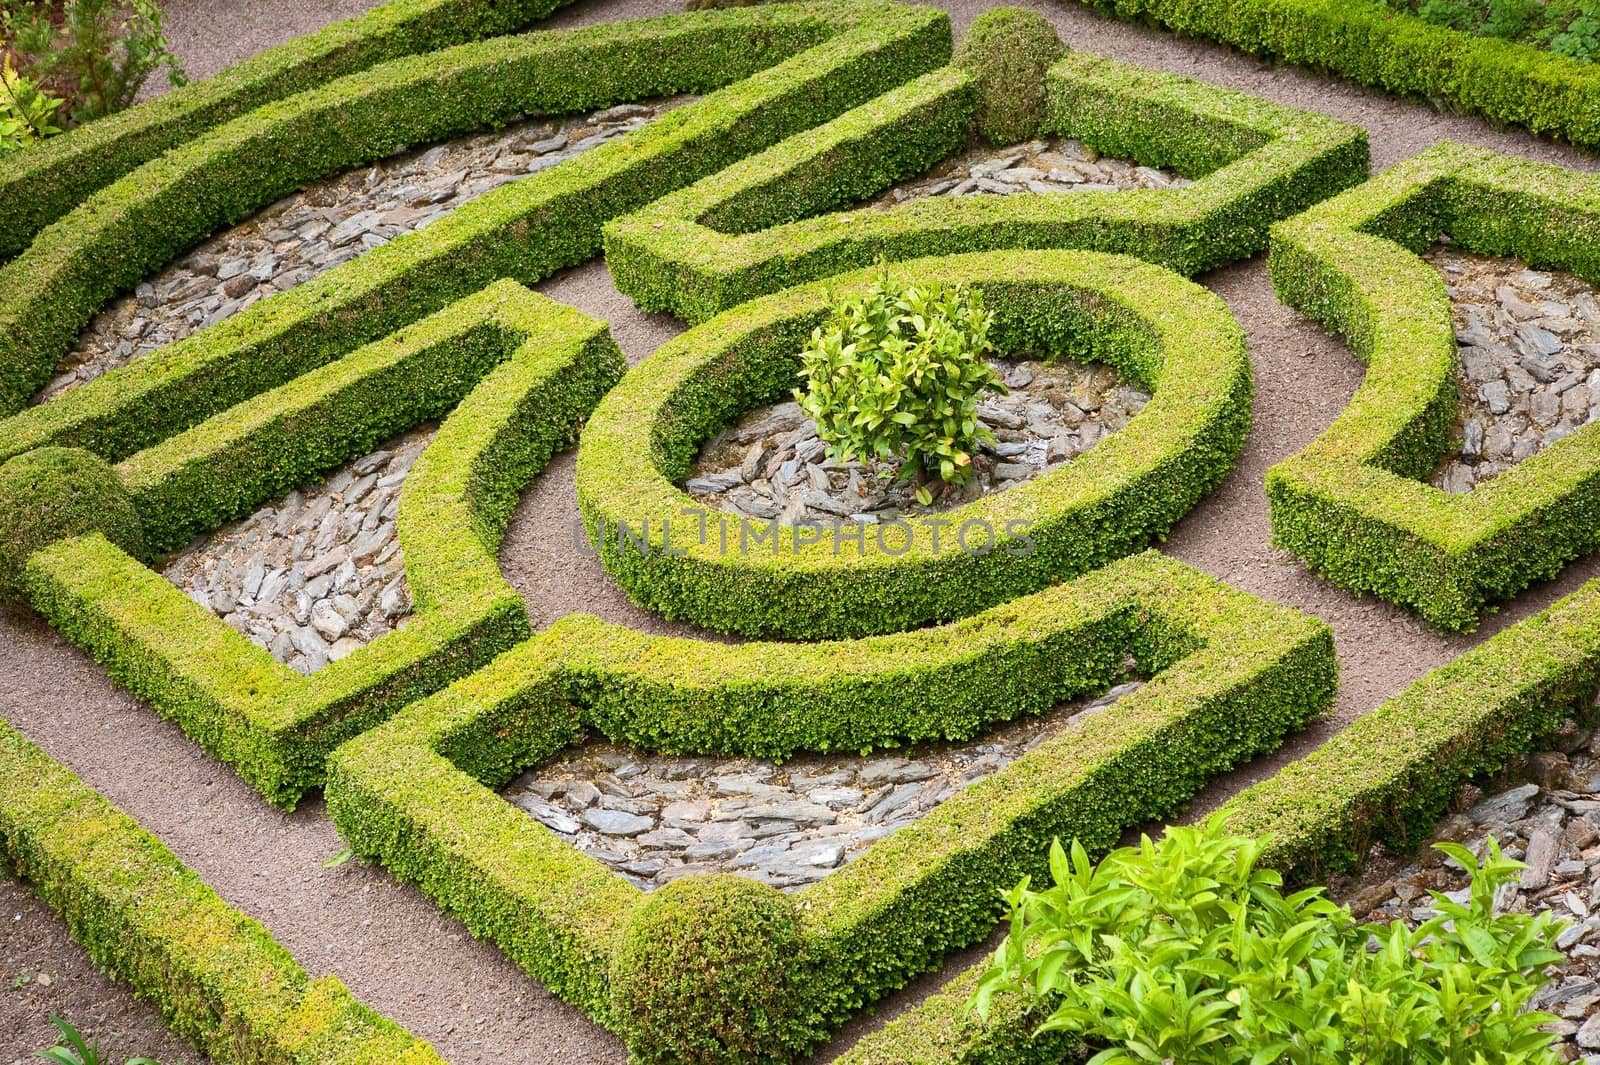 Topiary knot garden by andrewroland